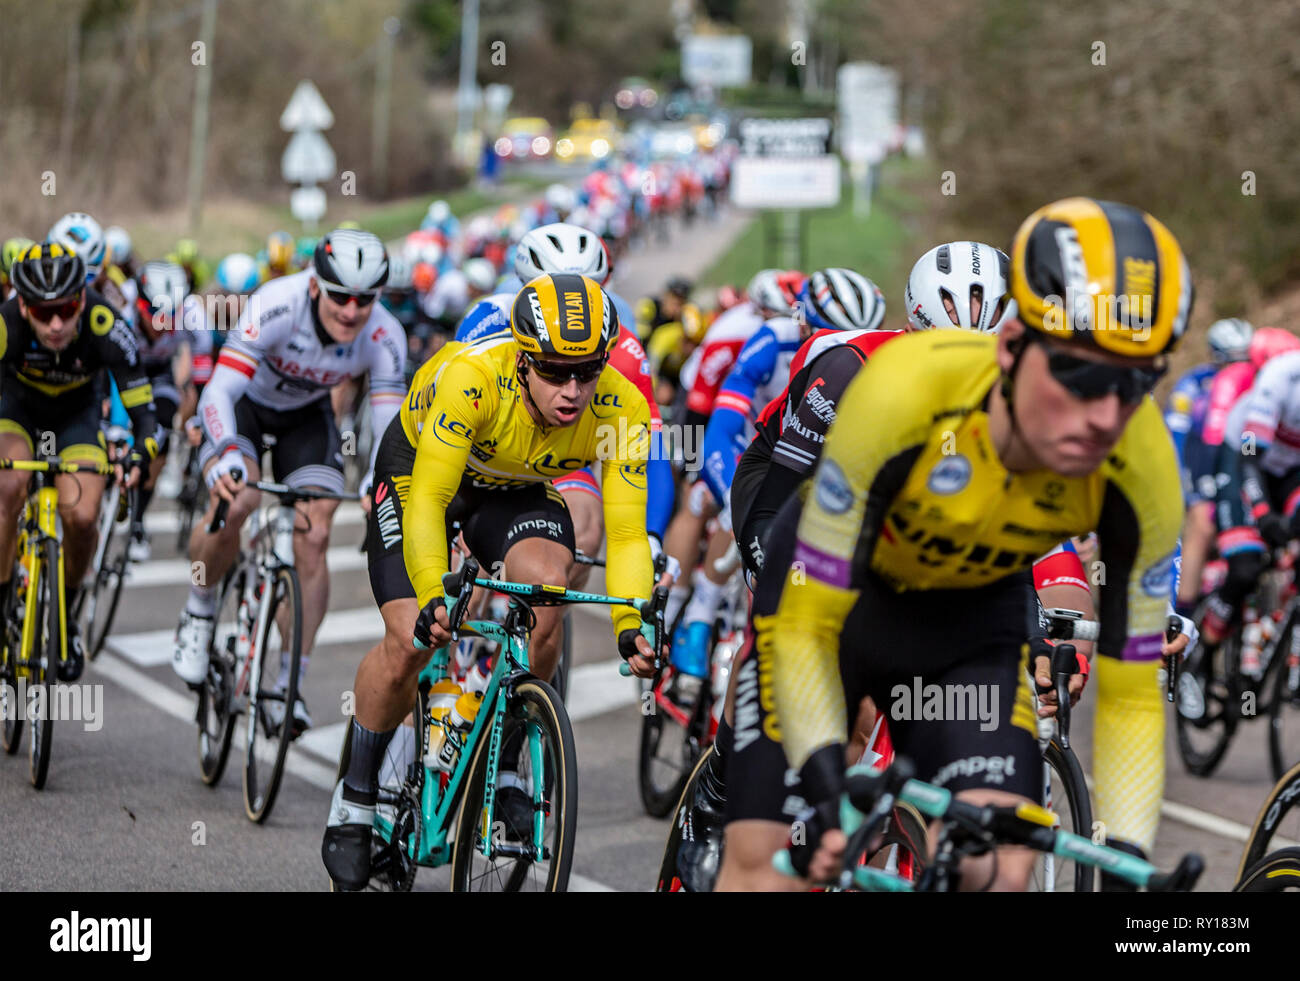 Les Granges-le-Roi, France - March 11, 2019: The Dutch cyclist Dylan Groenewegen of Jumbo-Visma Team riding in the peloton on Cote des Granges-le-Roi during the stage 2 of Paris-Nice 2019. Dylan won the first two stages of the race. Credit: Radu Razvan/Alamy Live News Stock Photo